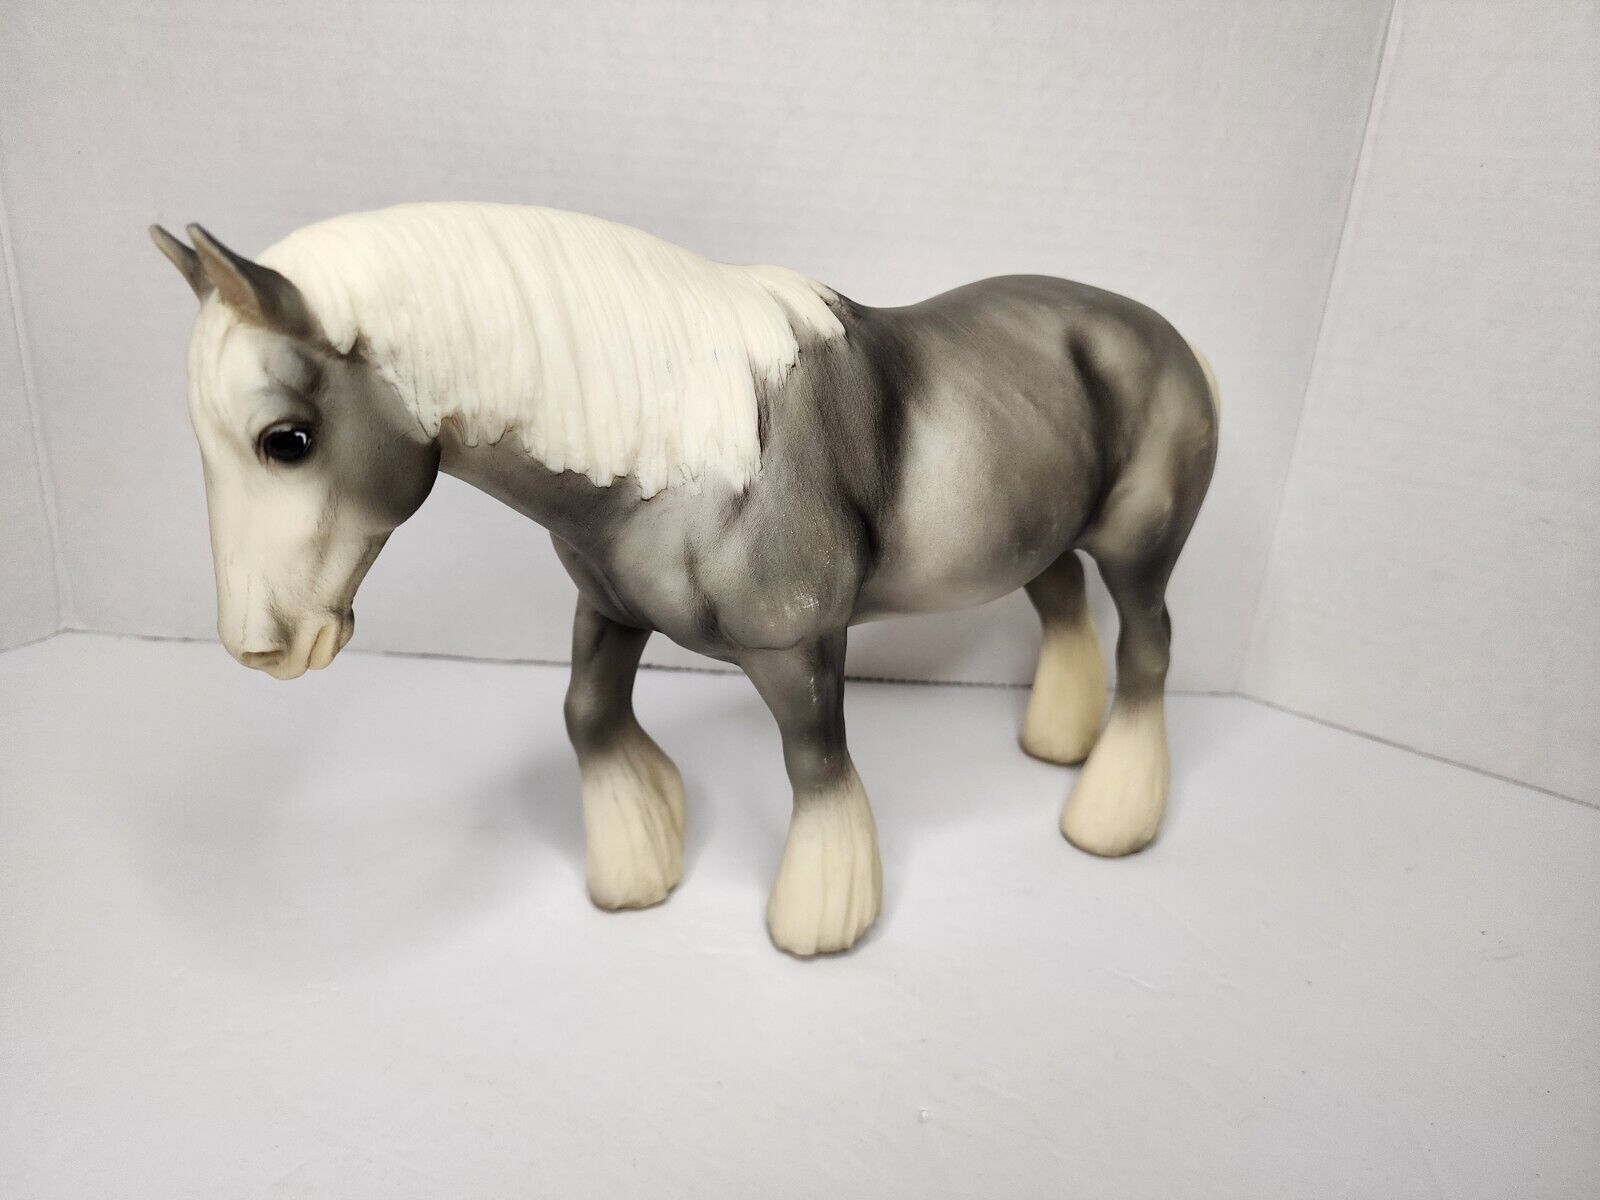 Breyer Molding Co. USA Clydesdale Horse Chess 71 Gray White Mane No Packaging